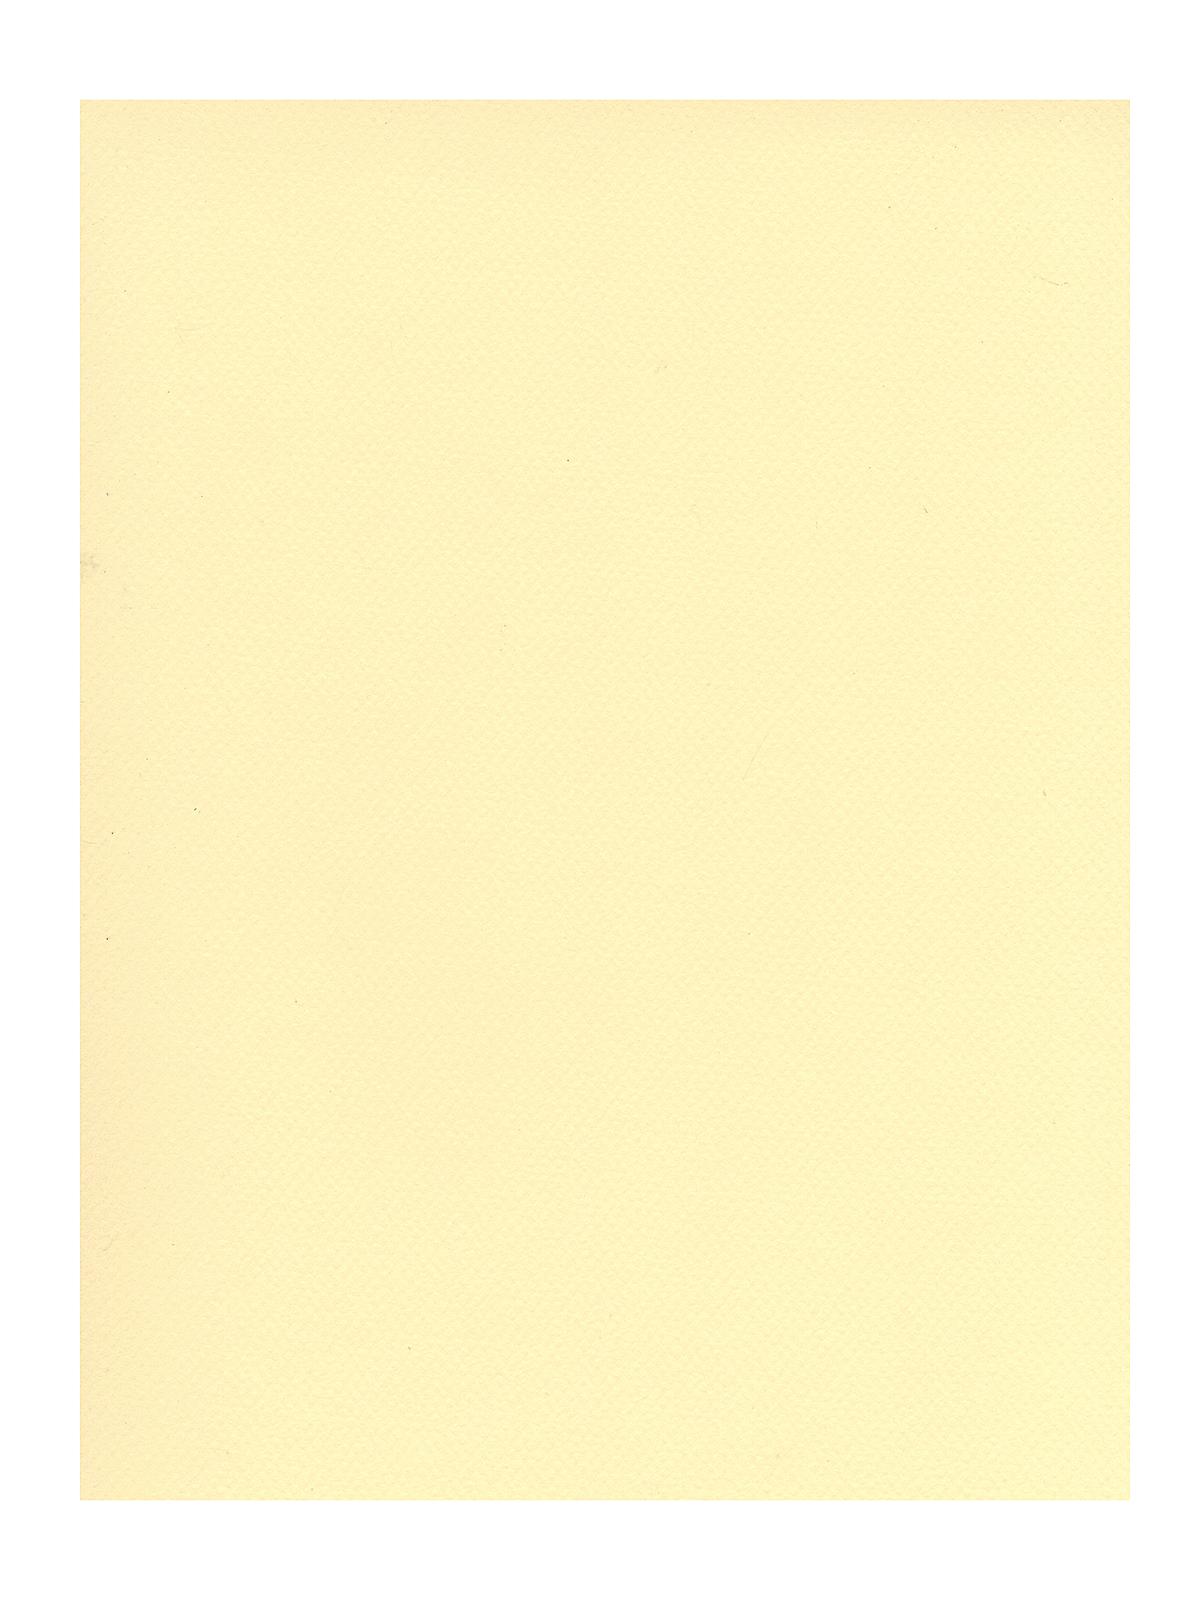 Mi-teintes Tinted Paper Pale Yellow 19 In. X 25 In.